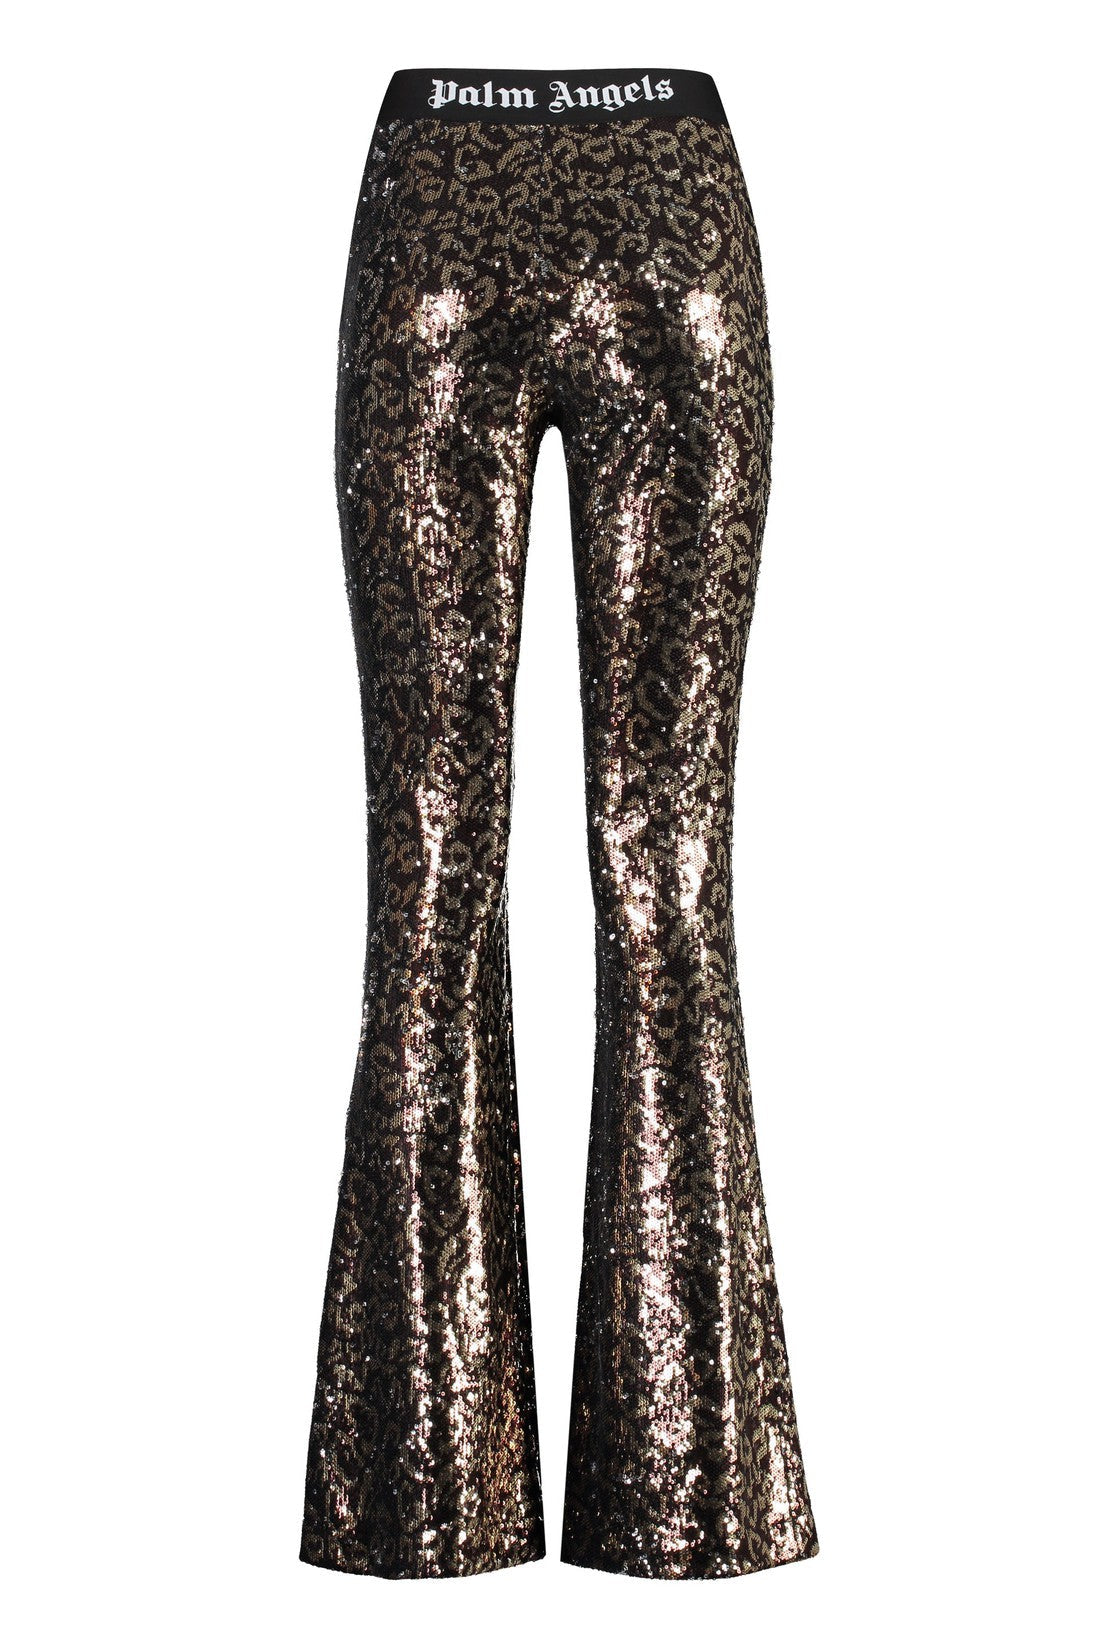 Palm Angels-OUTLET-SALE-Sequined trousers-ARCHIVIST